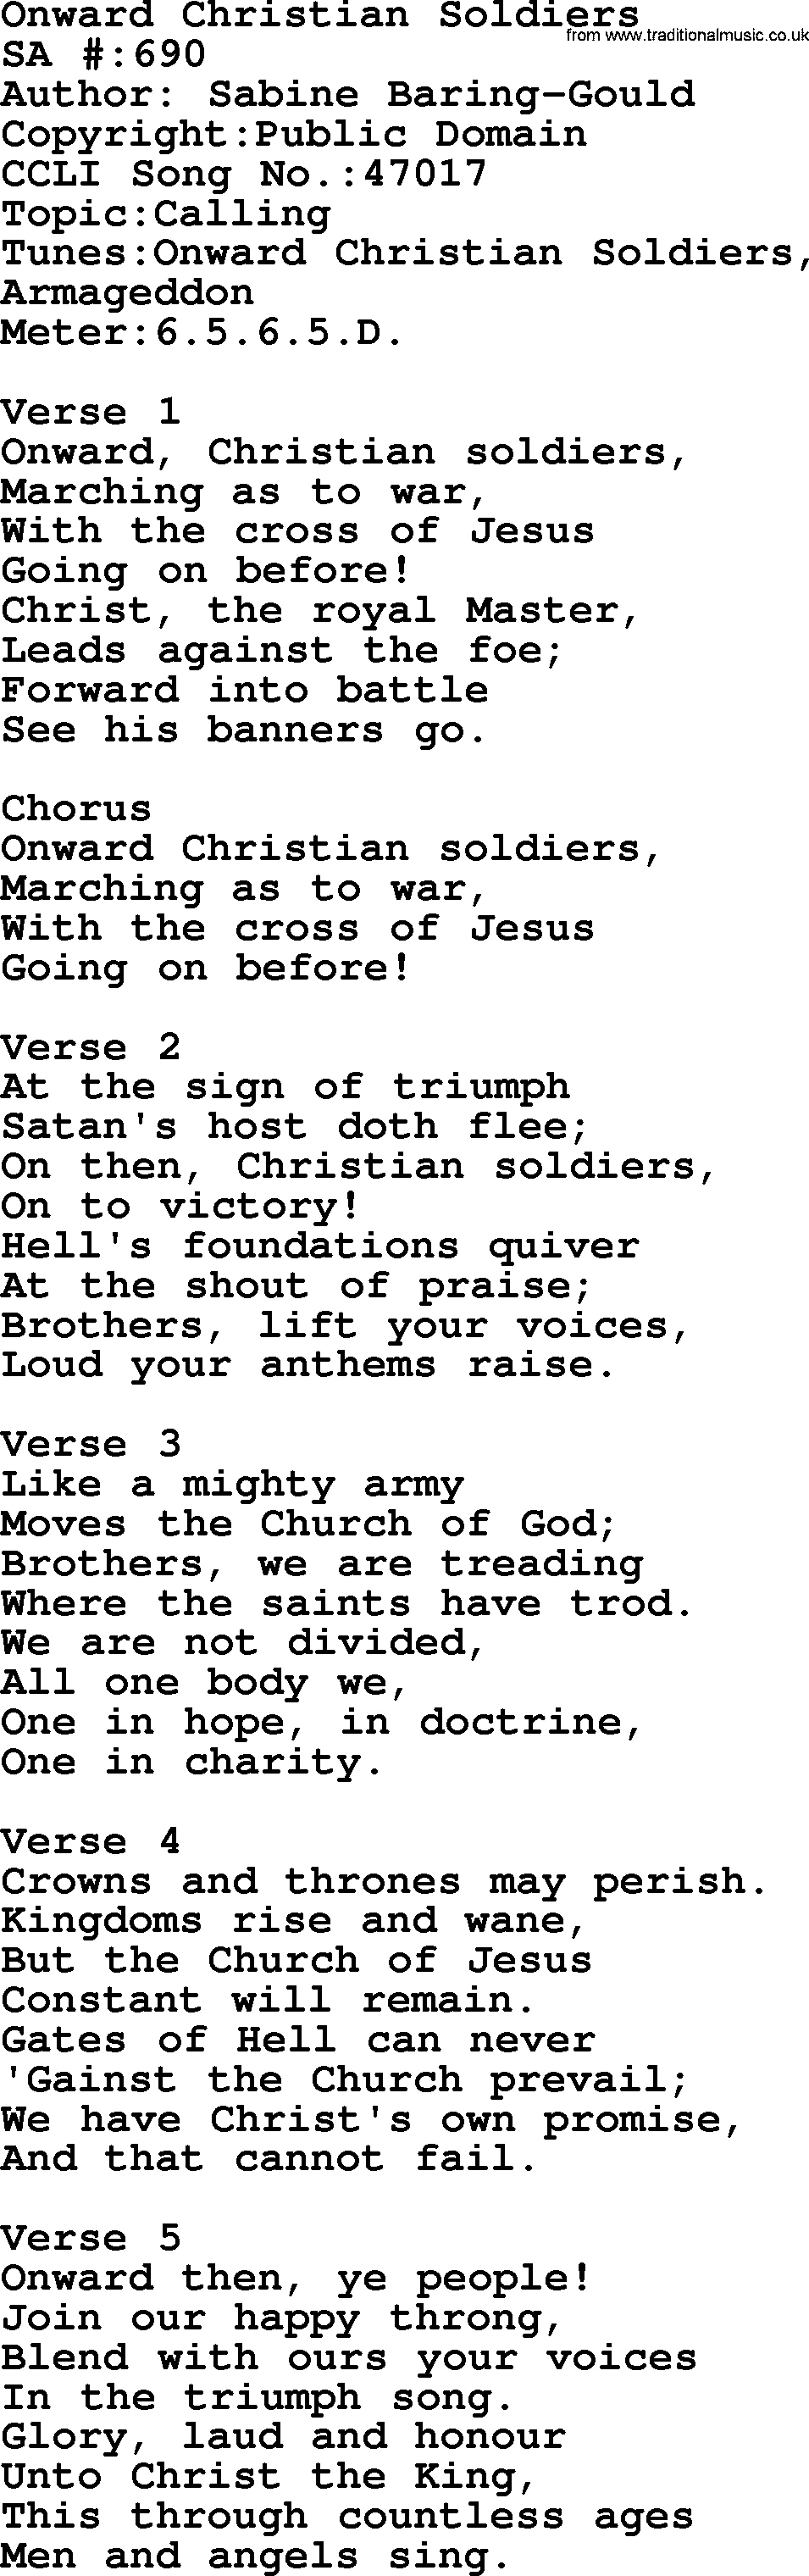 Salvation Army Hymnal, title: Onward Christian Soldiers, with lyrics and PDF,